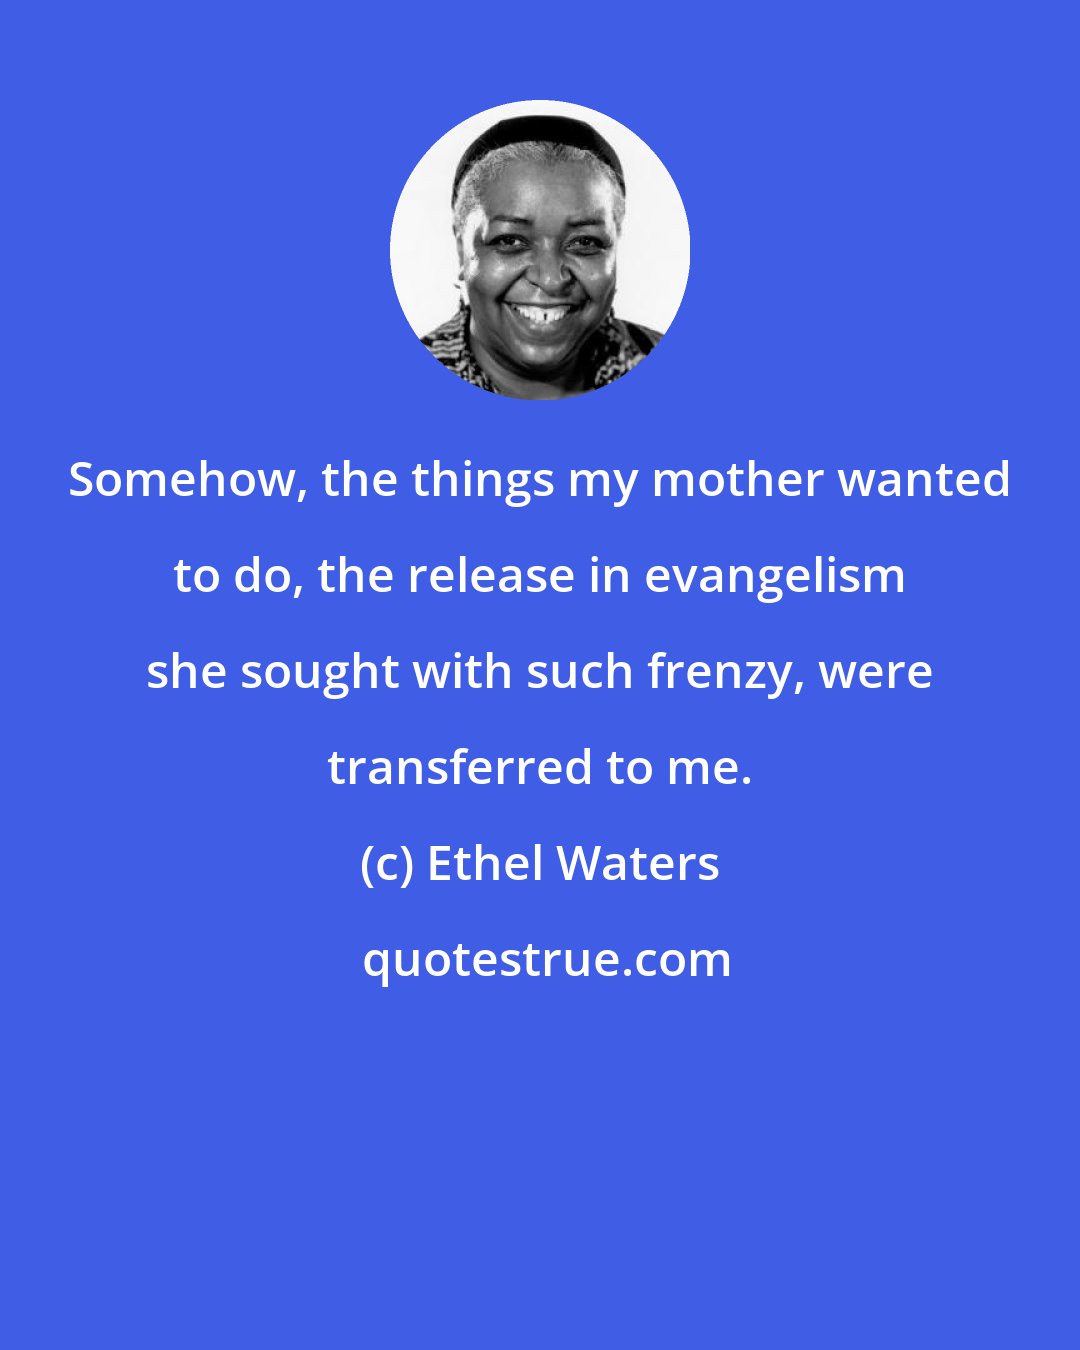 Ethel Waters: Somehow, the things my mother wanted to do, the release in evangelism she sought with such frenzy, were transferred to me.